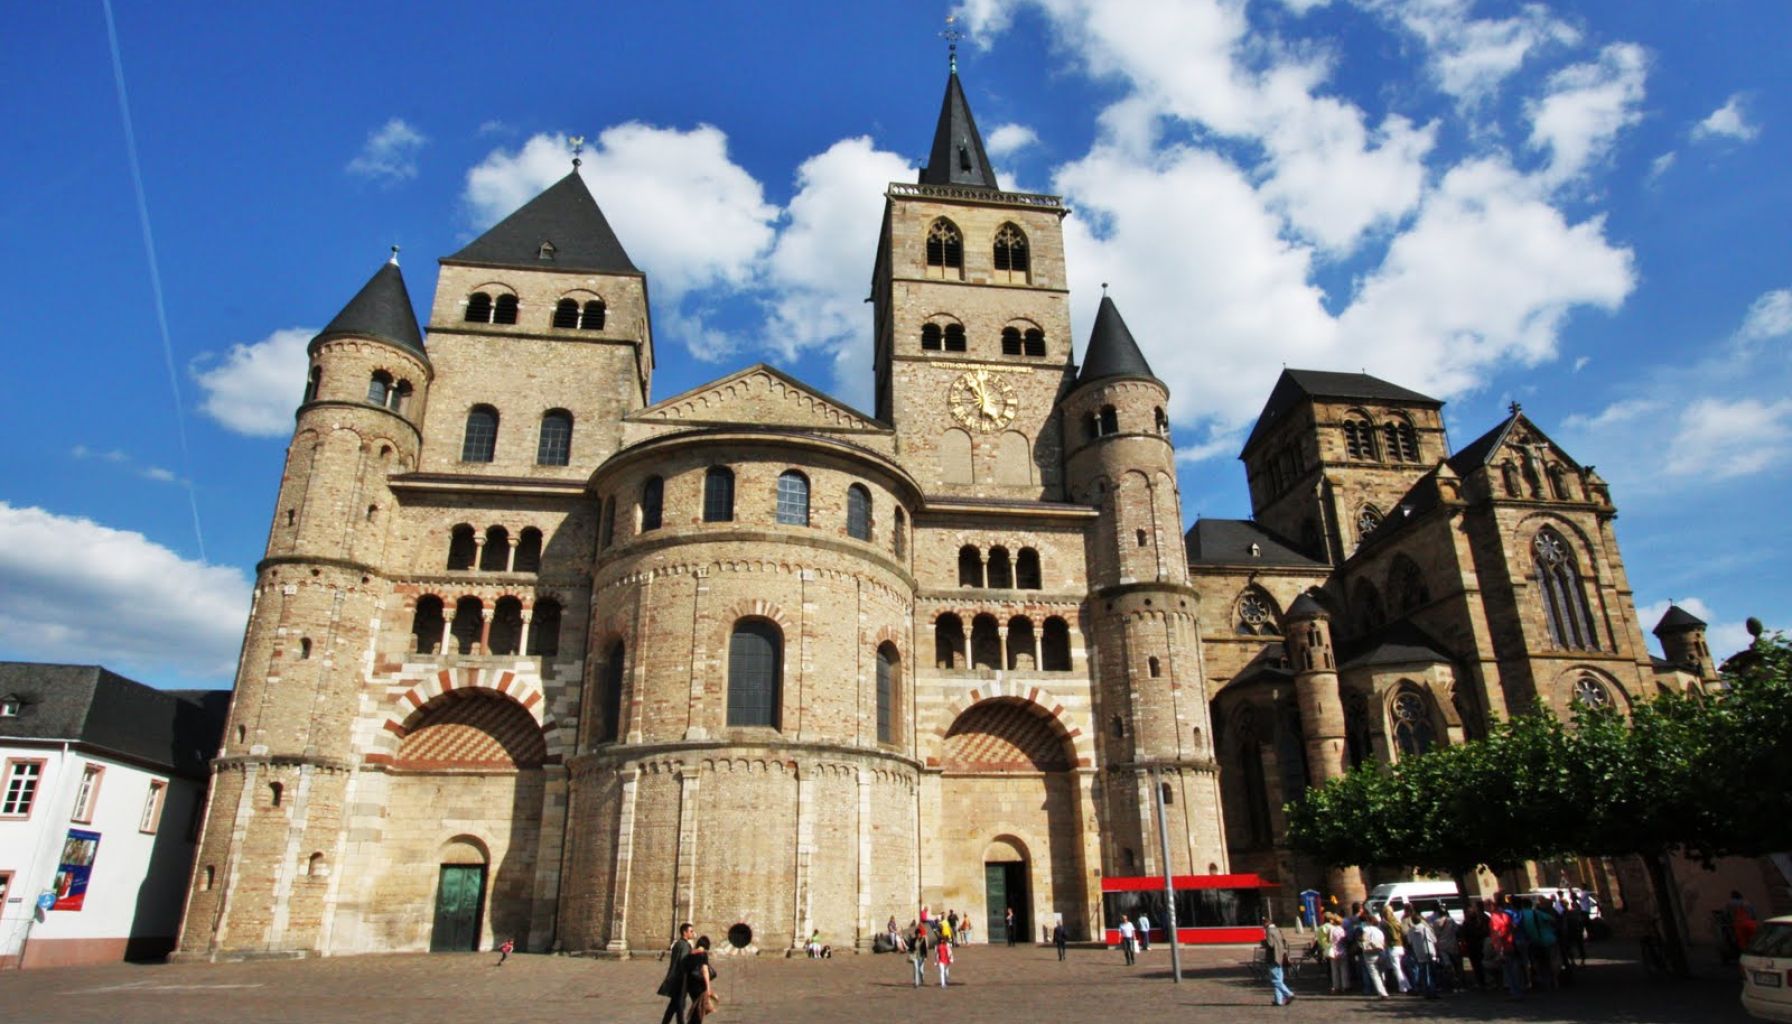 IMG_7042_The-Cathedral-of-Trier.jpg